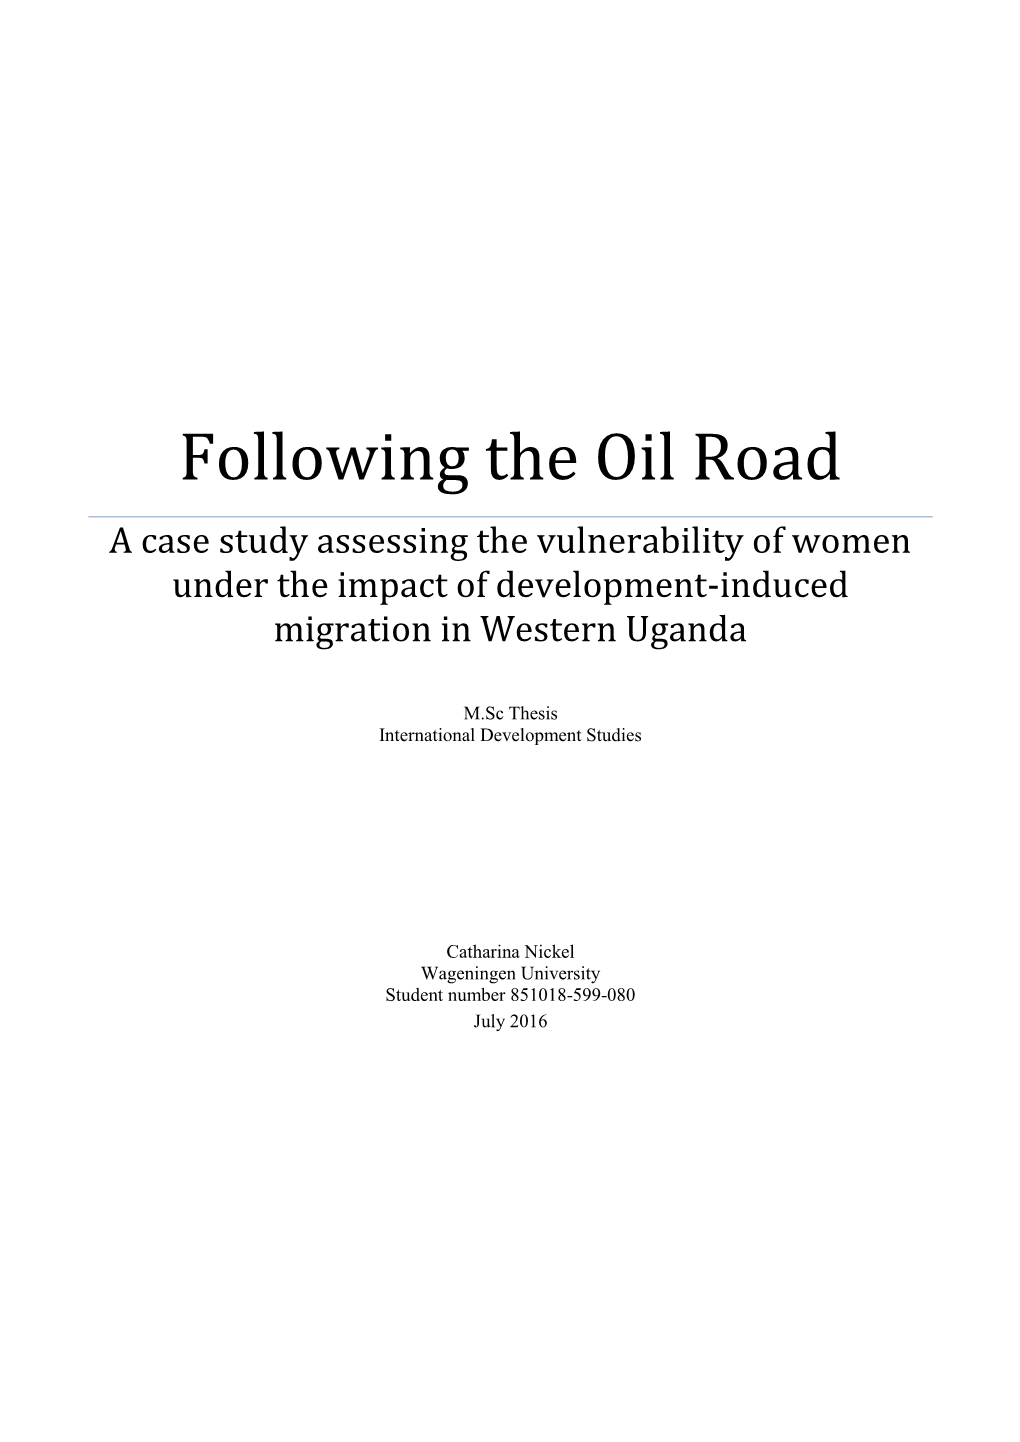 Following the Oil Road a Case Study Assessing the Vulnerability of Women Under the Impact of Development-Induced Migration in Western Uganda